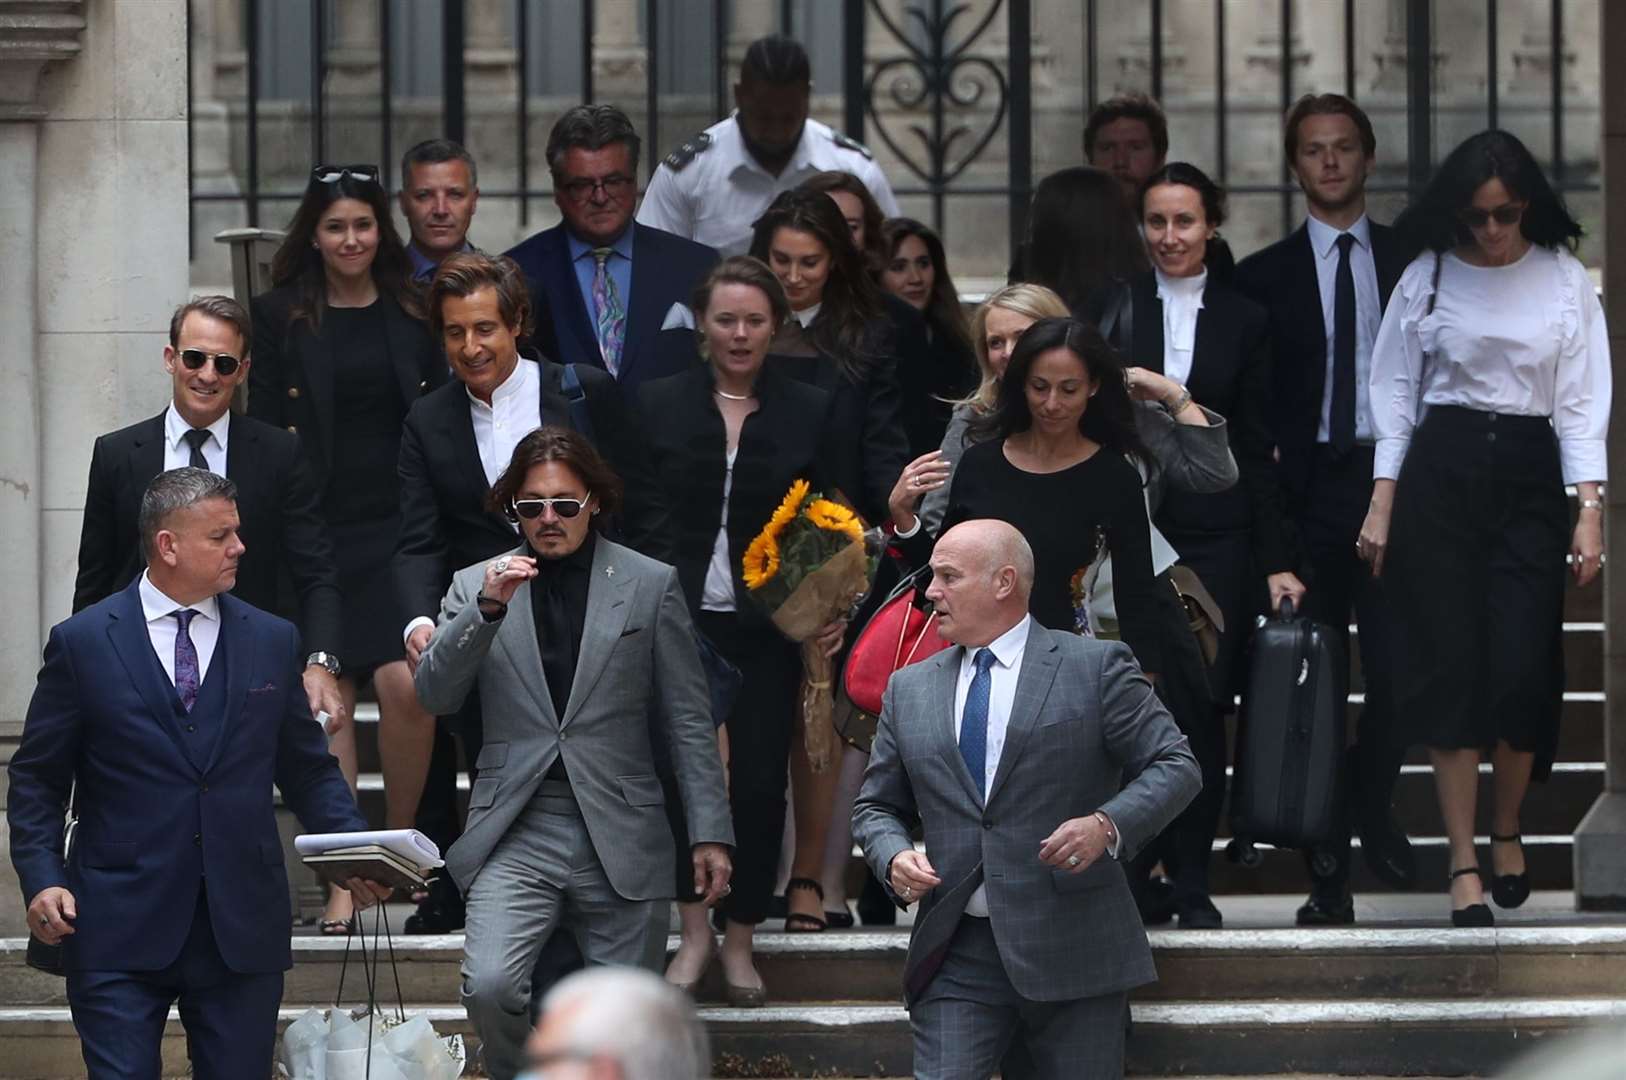 Johnny Depp attended the trial held over three weeks at the Royal Courts of Justice in London (Yui Mok/PA)